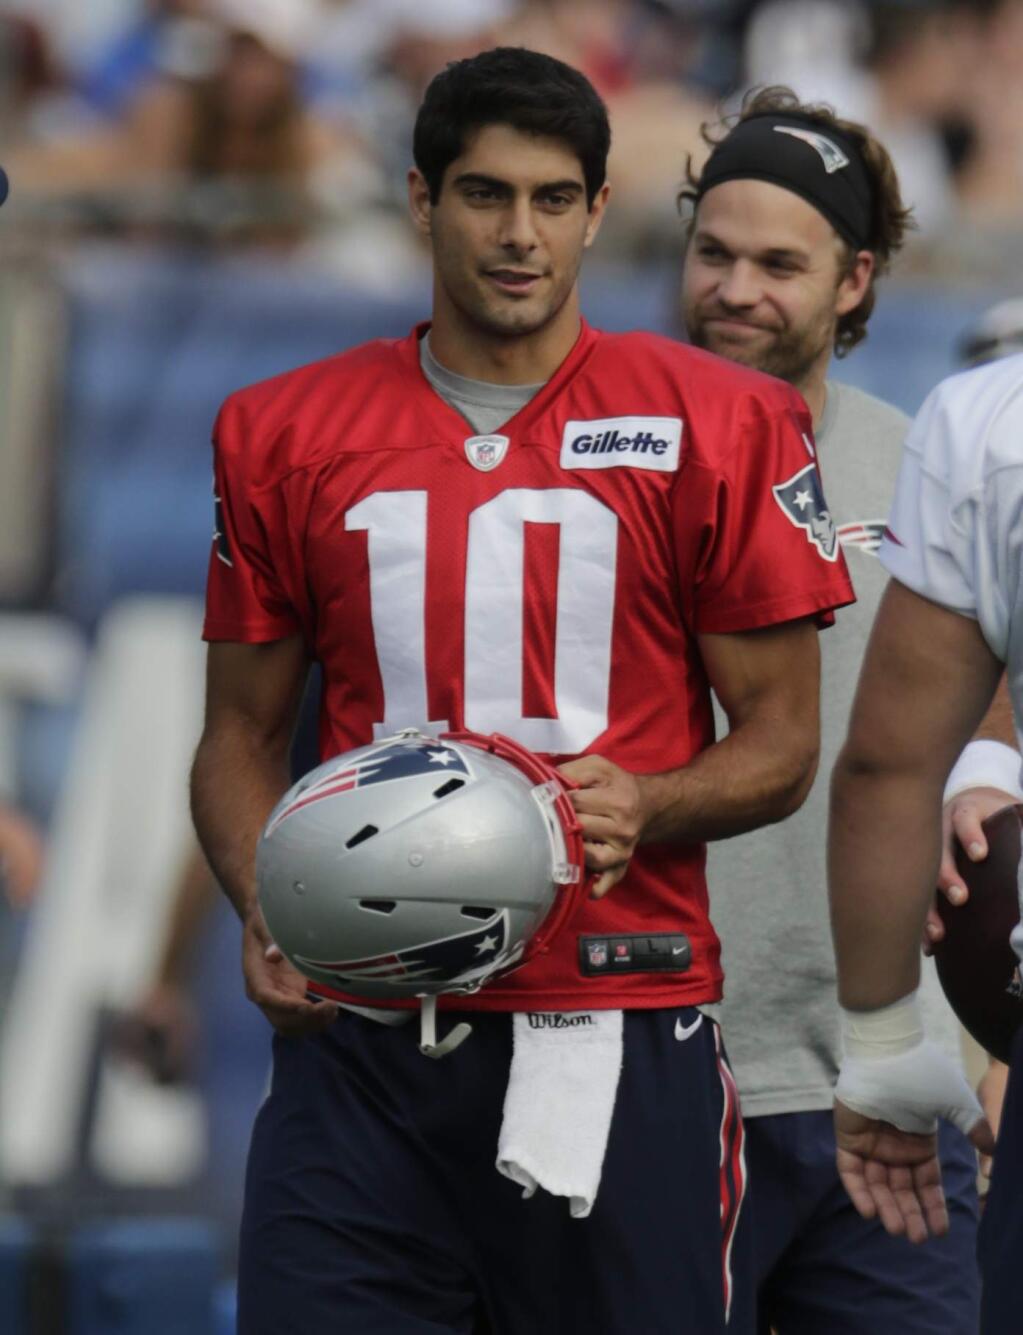 New England Patriots quarterback Jimmy Garoppolo gets ready to practice during training camp in Foxborough, Mass., Wednesday, Aug. 5, 2015. (AP Photo/Charles Krupa)